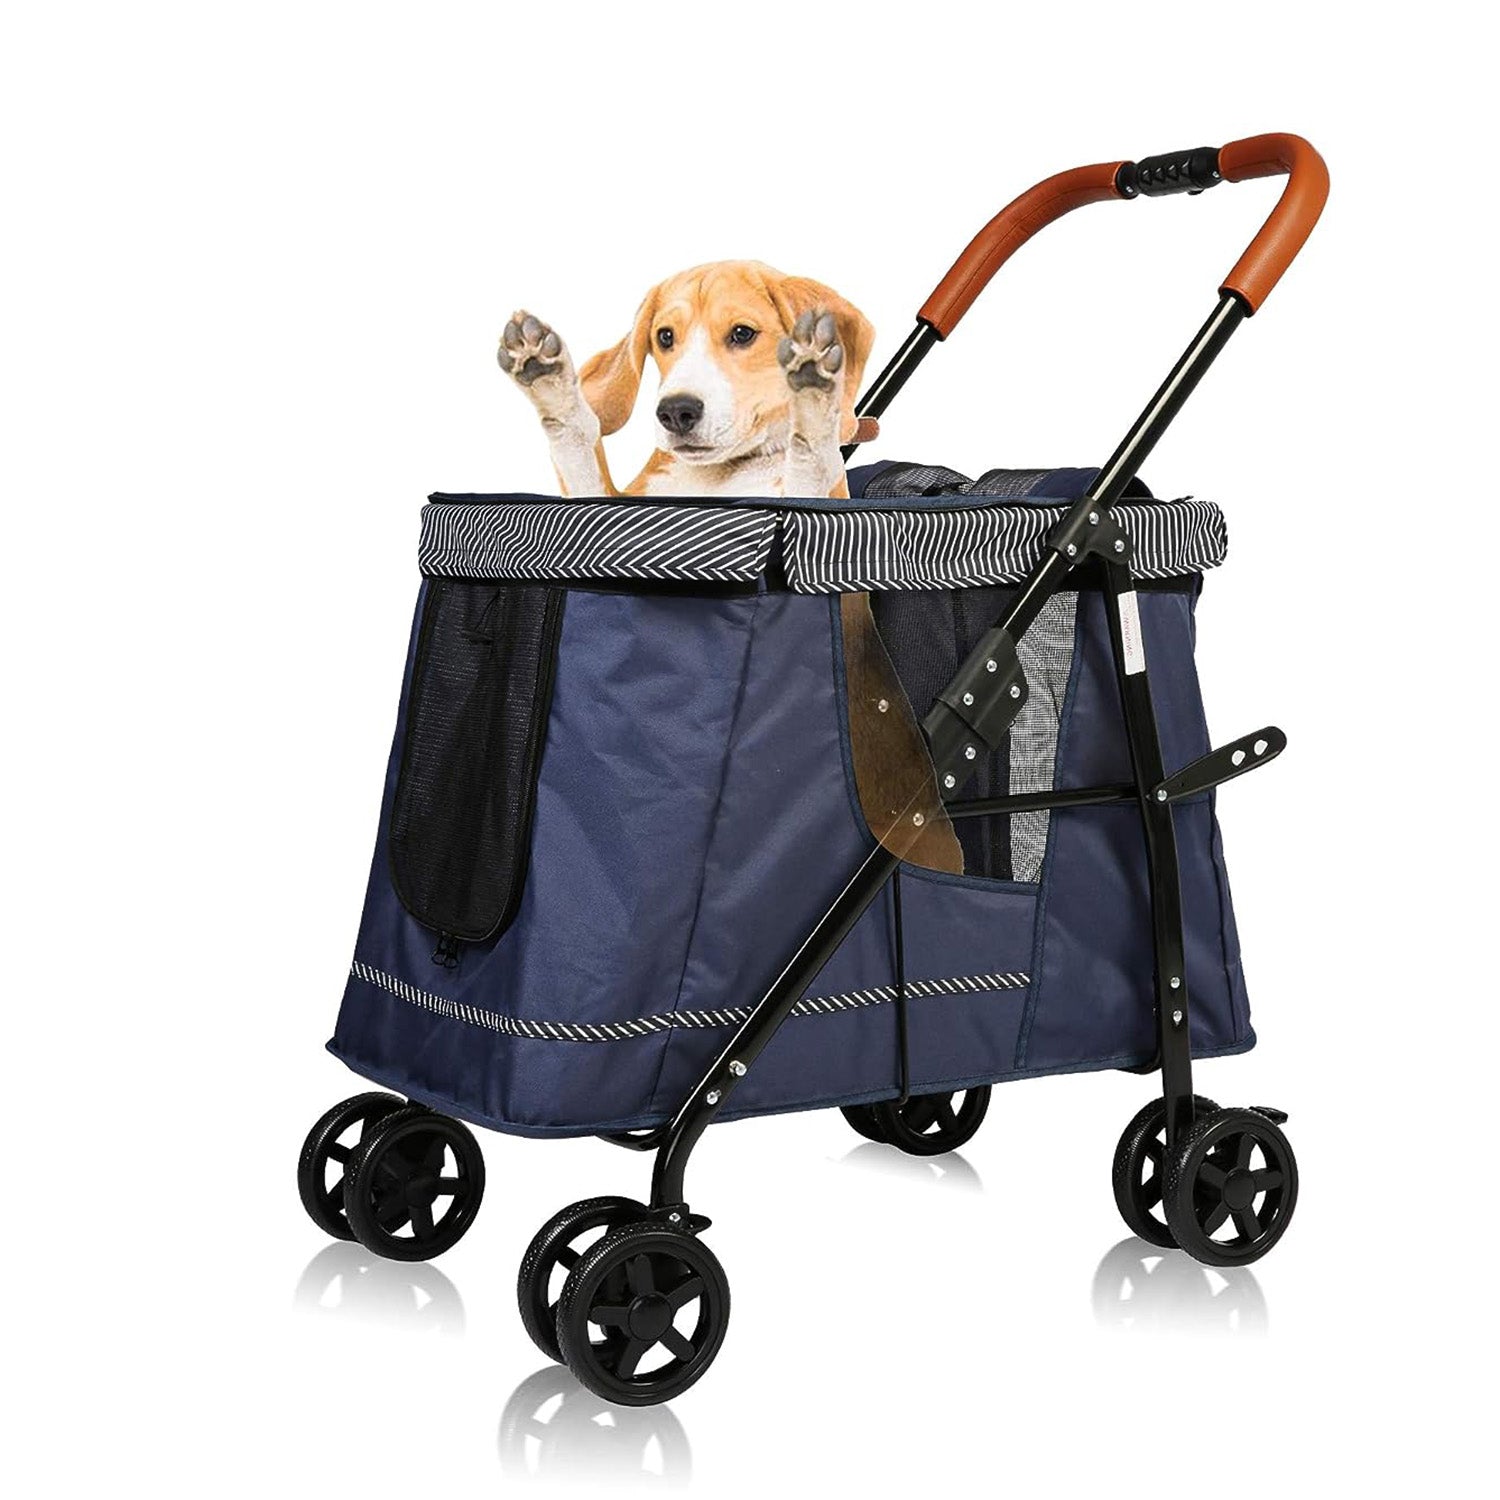 Folding Dog Stroller Pet Stroller with Removable Cushion and Multiple Mesh Windows, Blue